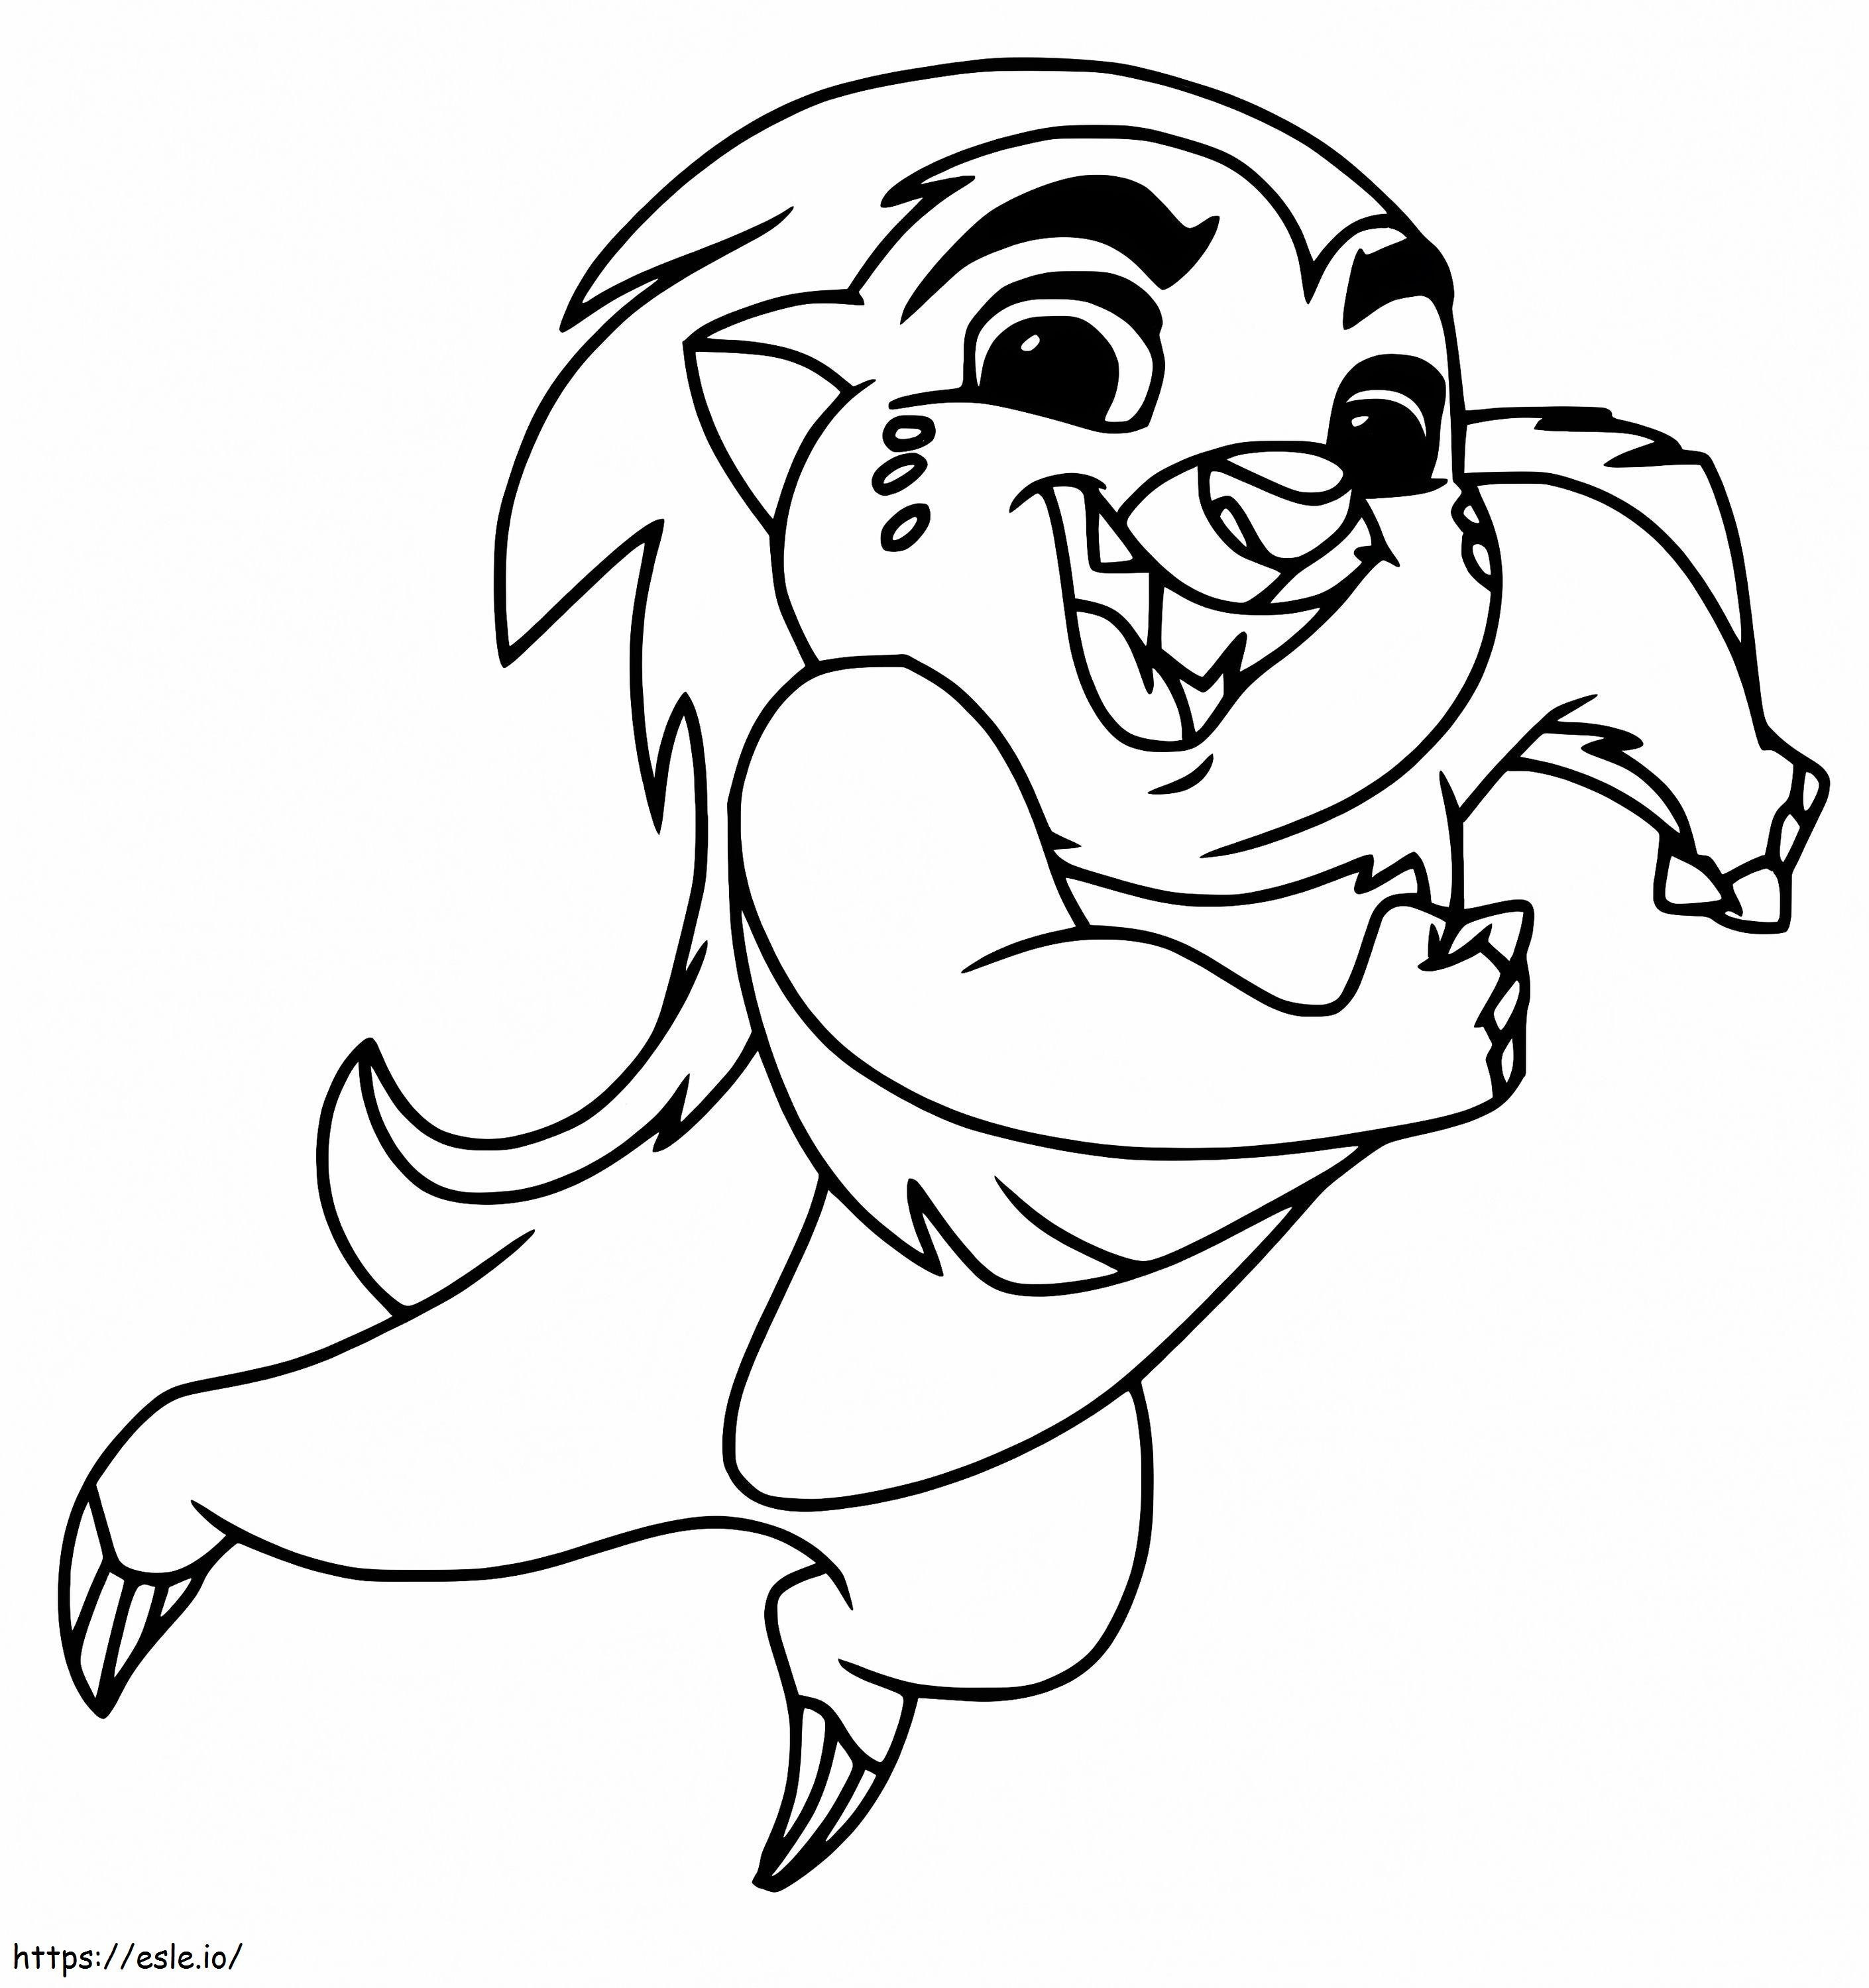 Bunga From The Lion Guard coloring page